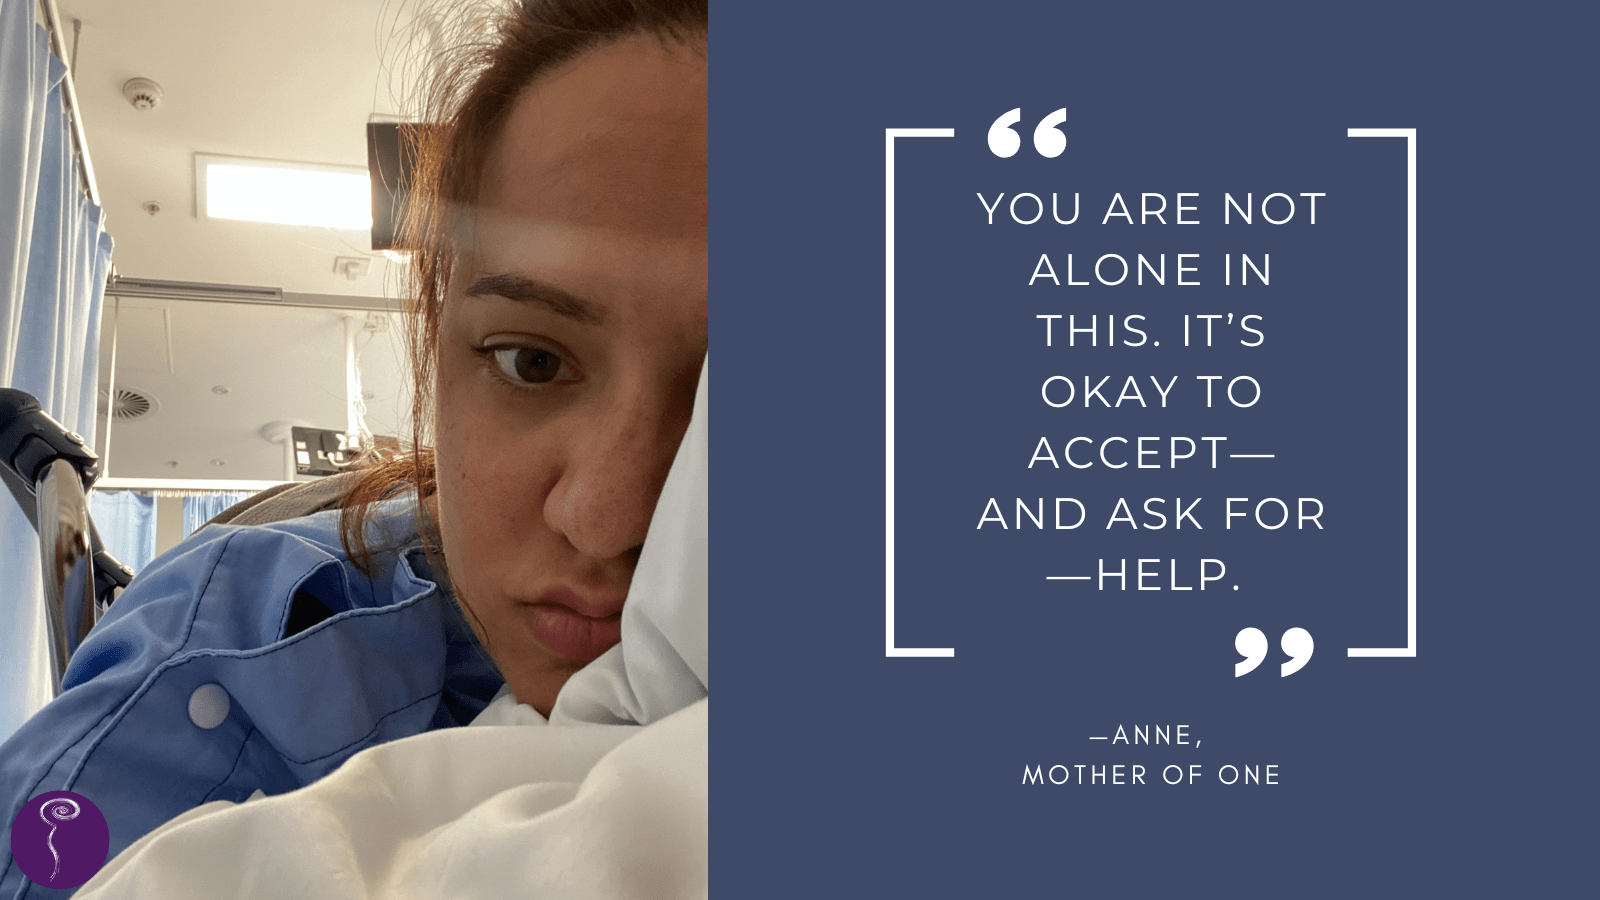 A woman faces the camera while lying face-down in a hospital bed. She wears a light blue hospital gown and wisps of brown hair frame her face. The quote reads: "You are not alone in this. It's okay to accept—and to ask for—help."